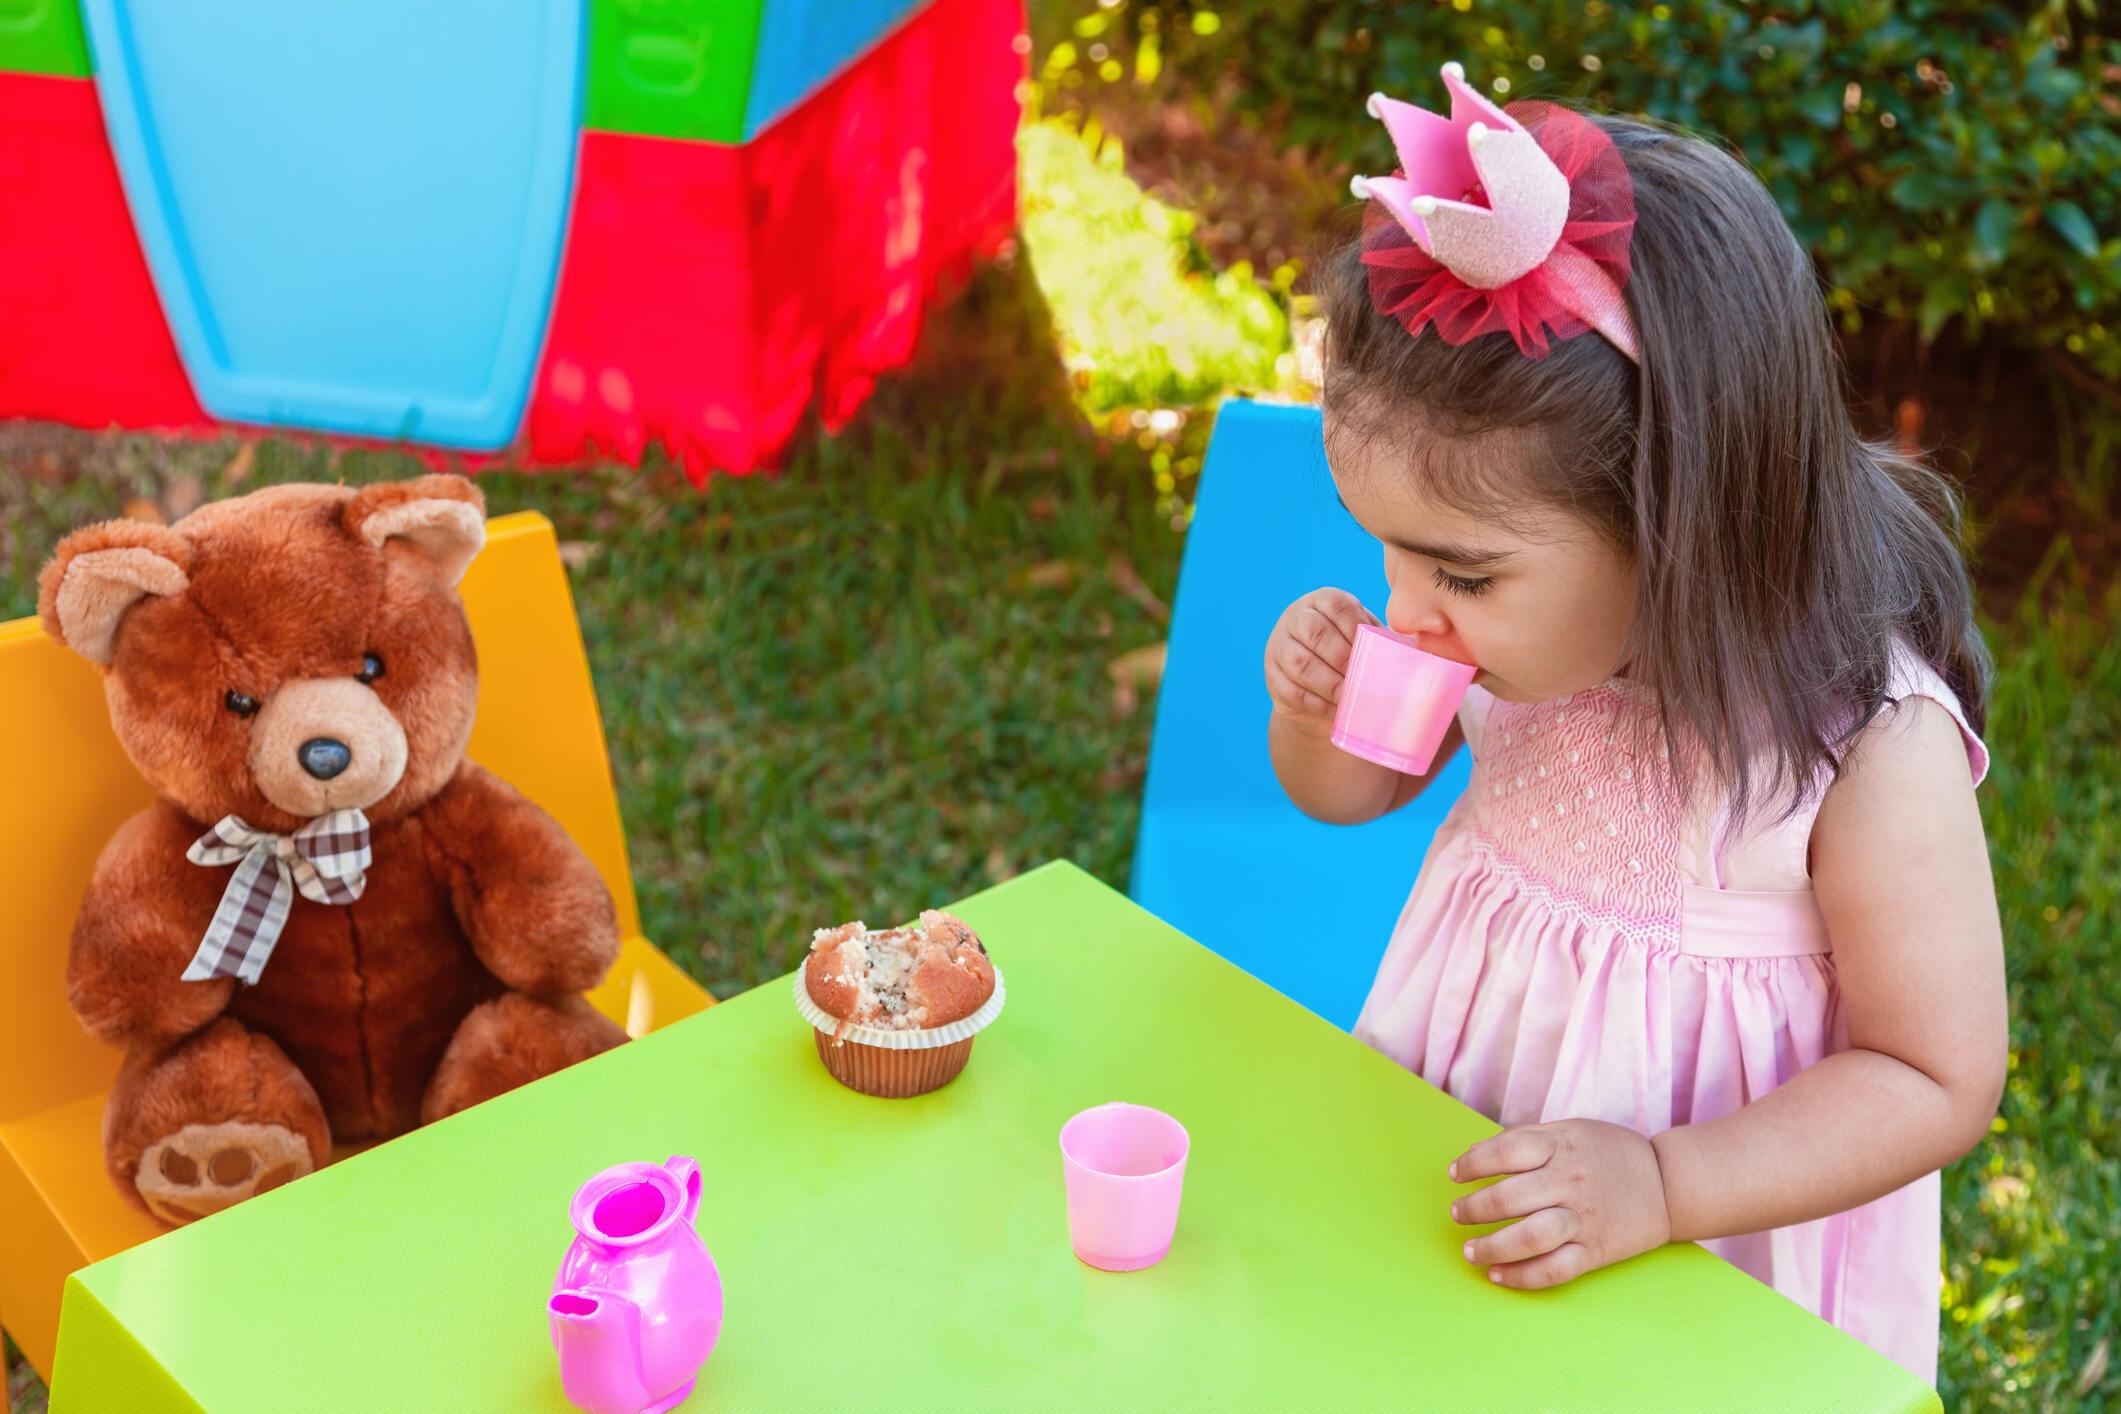 A little girl in pink dress playing house with her brown teddy bear